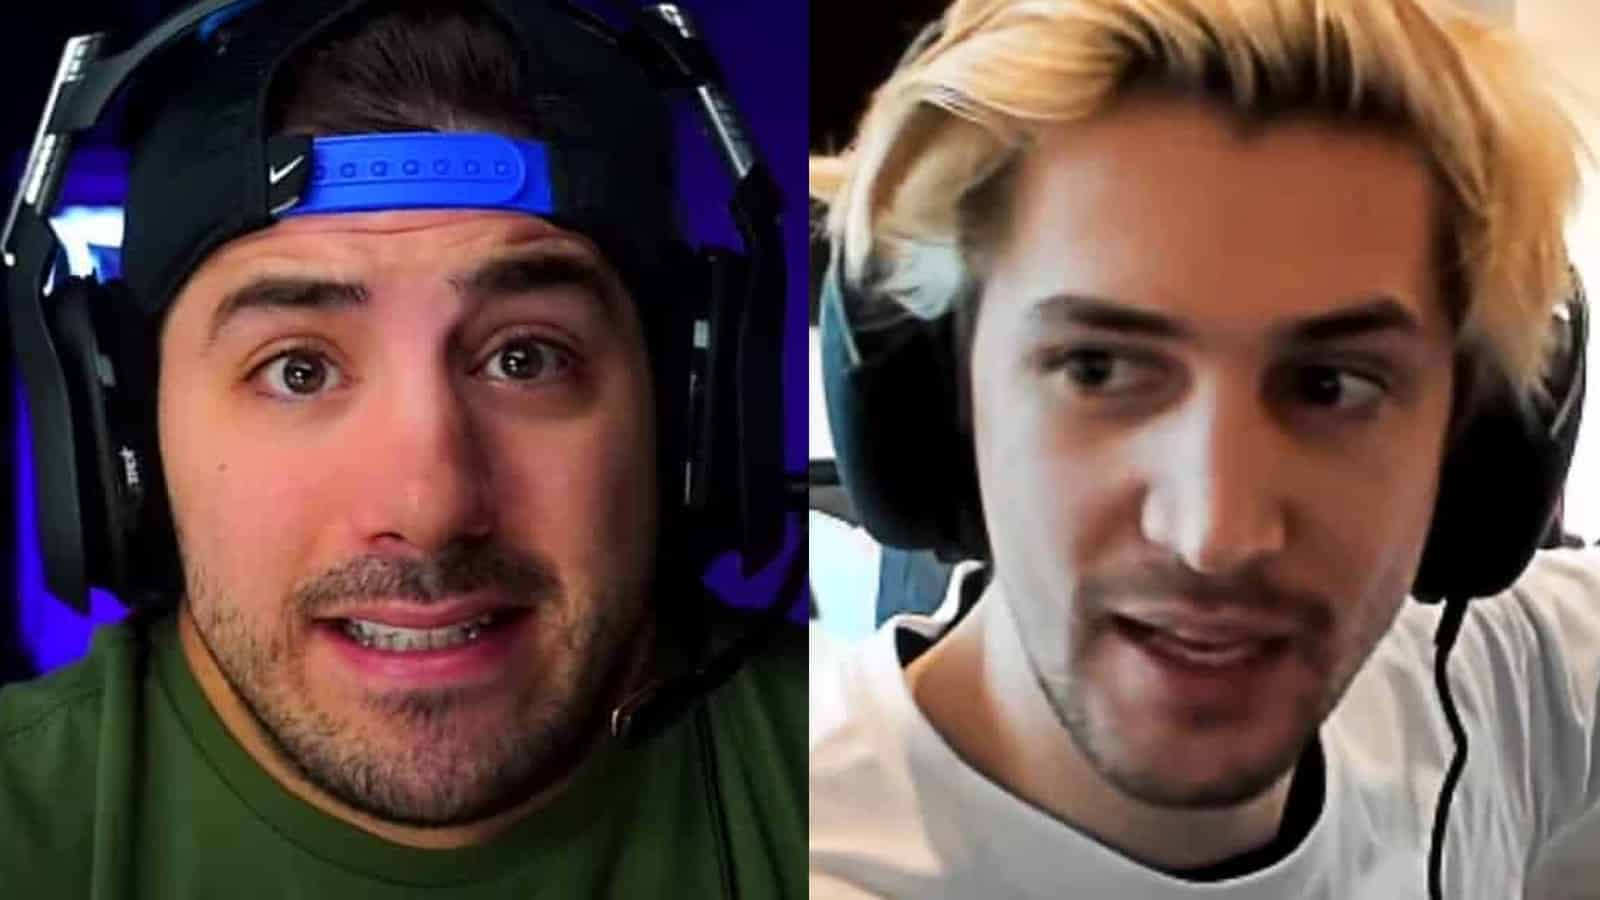 nickmercs and xqc side by side